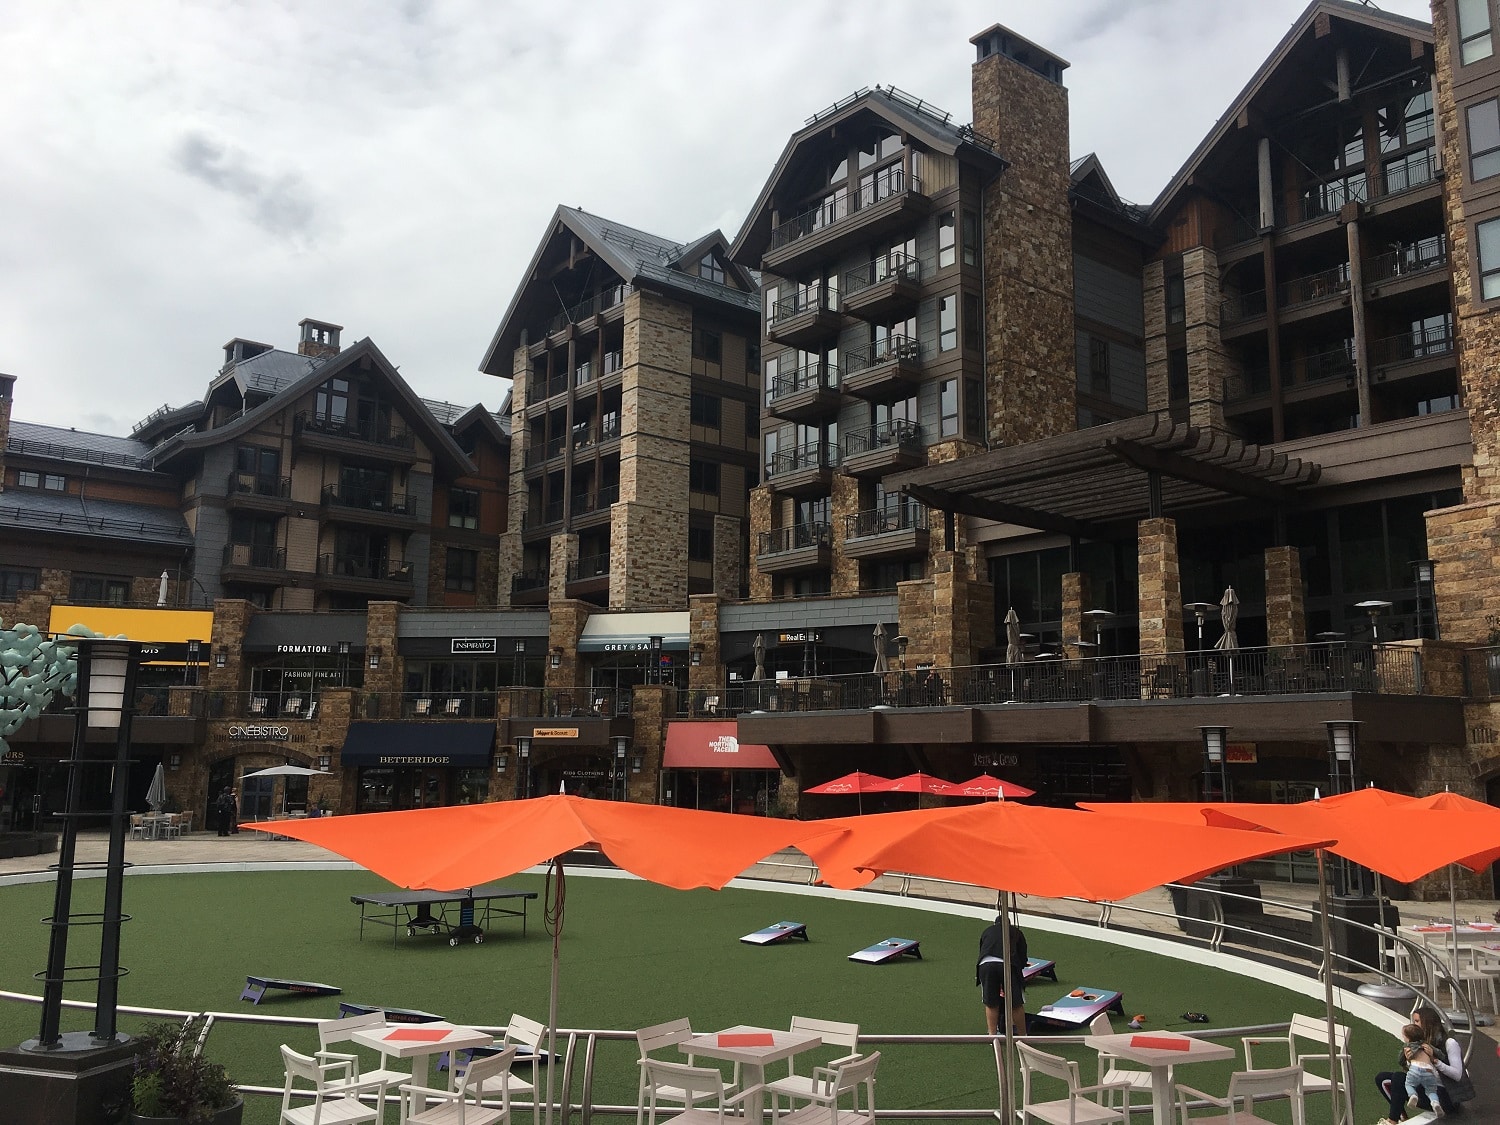 Judge orders Chinese investors to pay attorney's fees in suit over Vail condo project